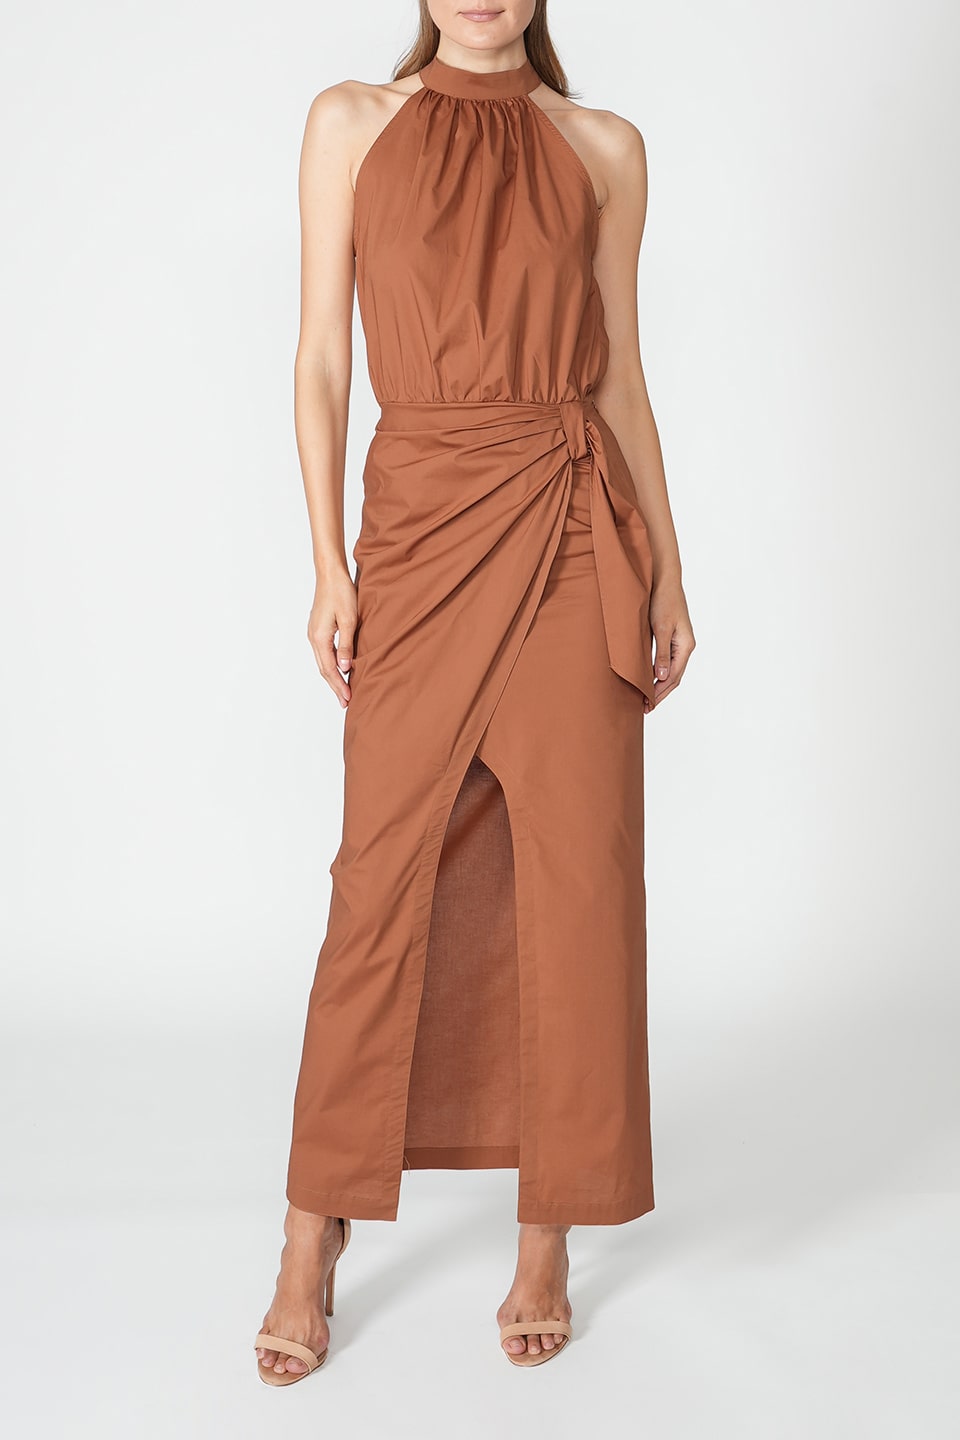 Designer Chocolate Midi dresses, shop online with free delivery in UAE. Product gallery 3